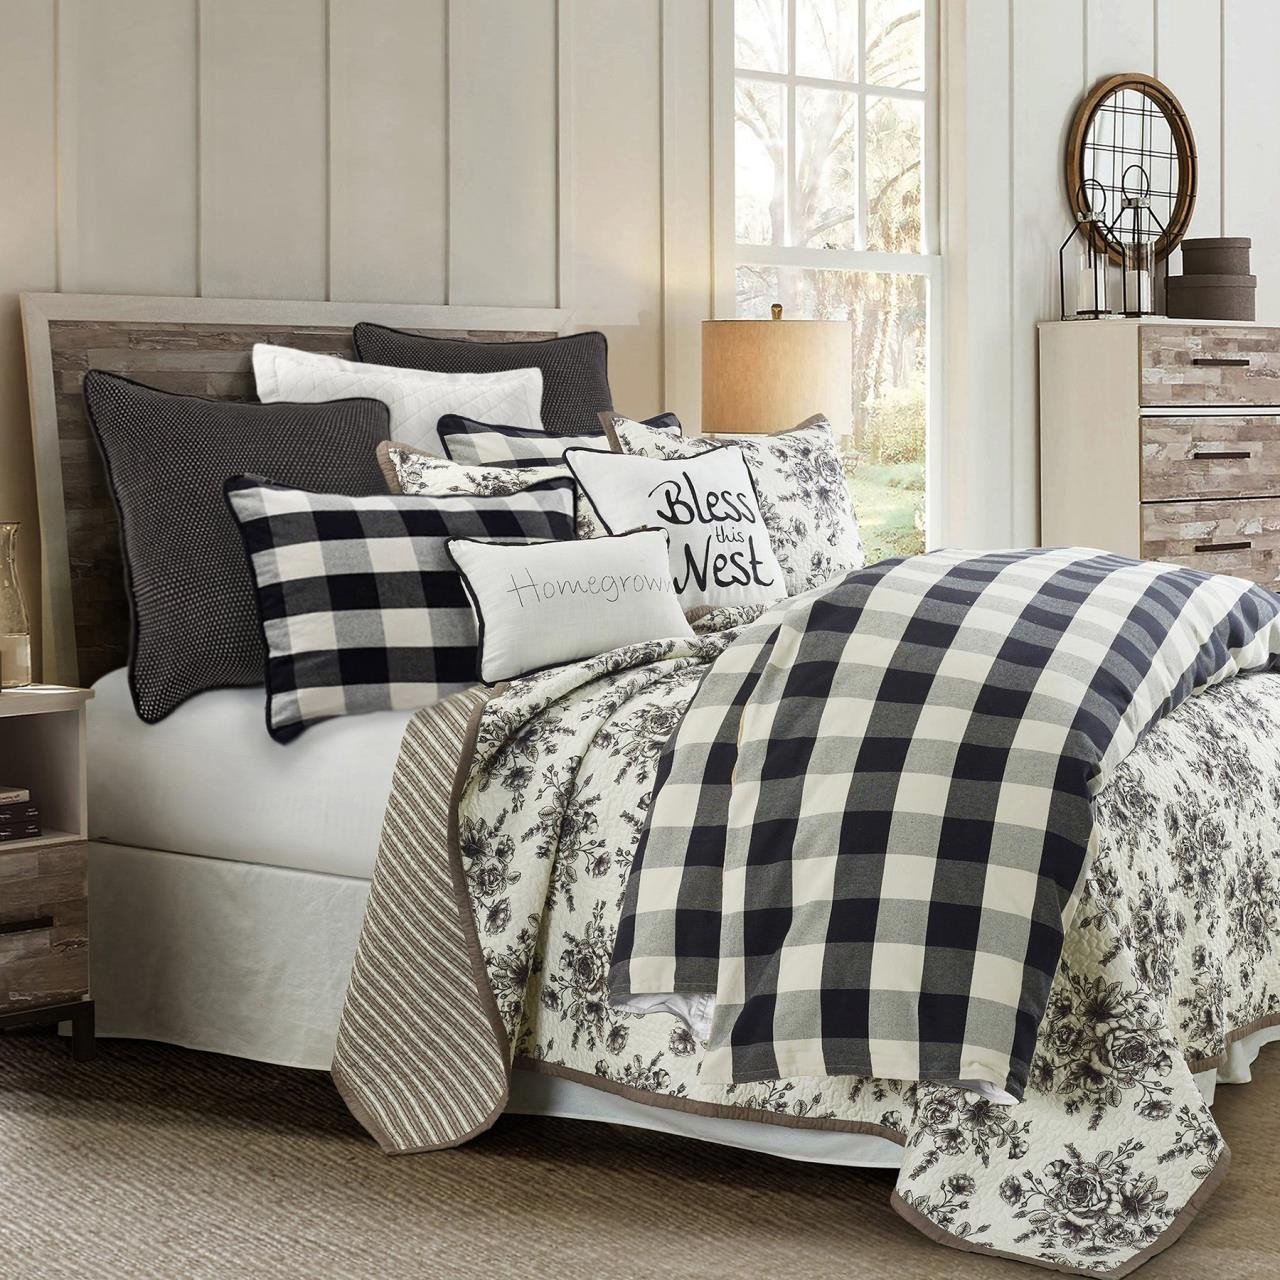 Camille Black Bedding Collection -